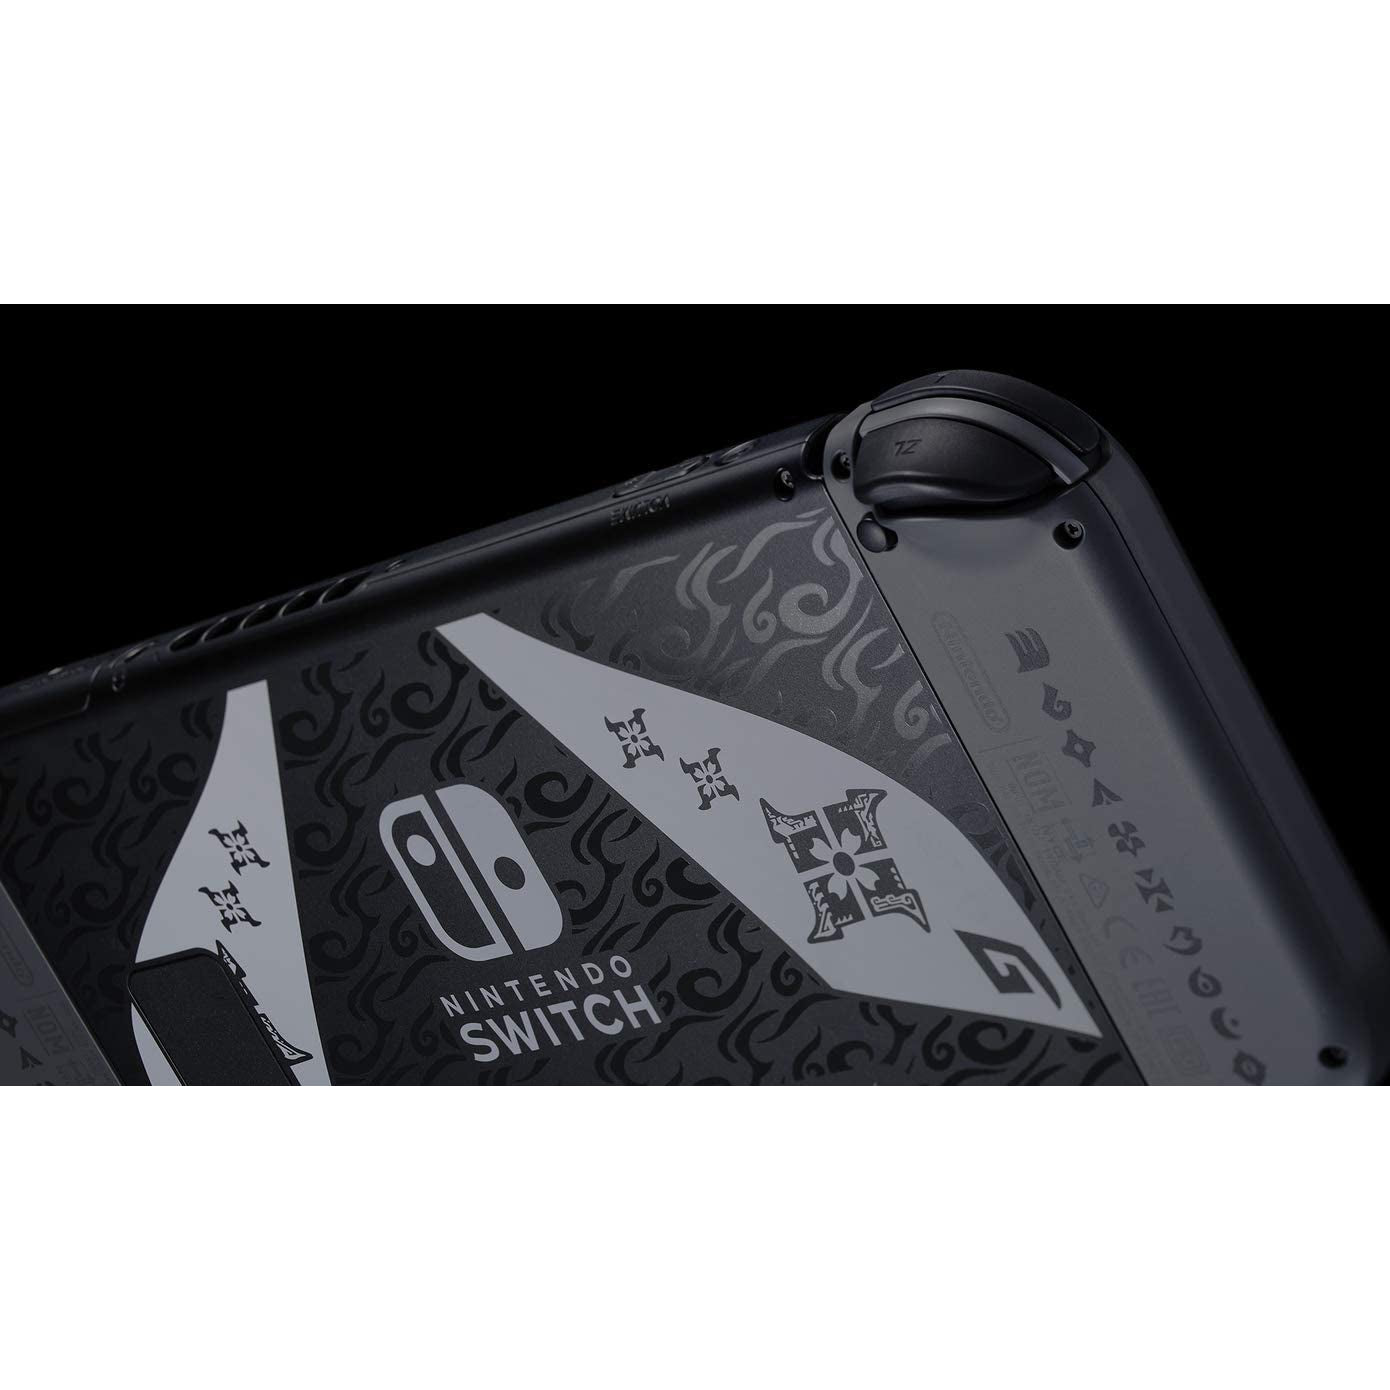 Nintendo Switch Games Console - Monster Hunter Rise Edition